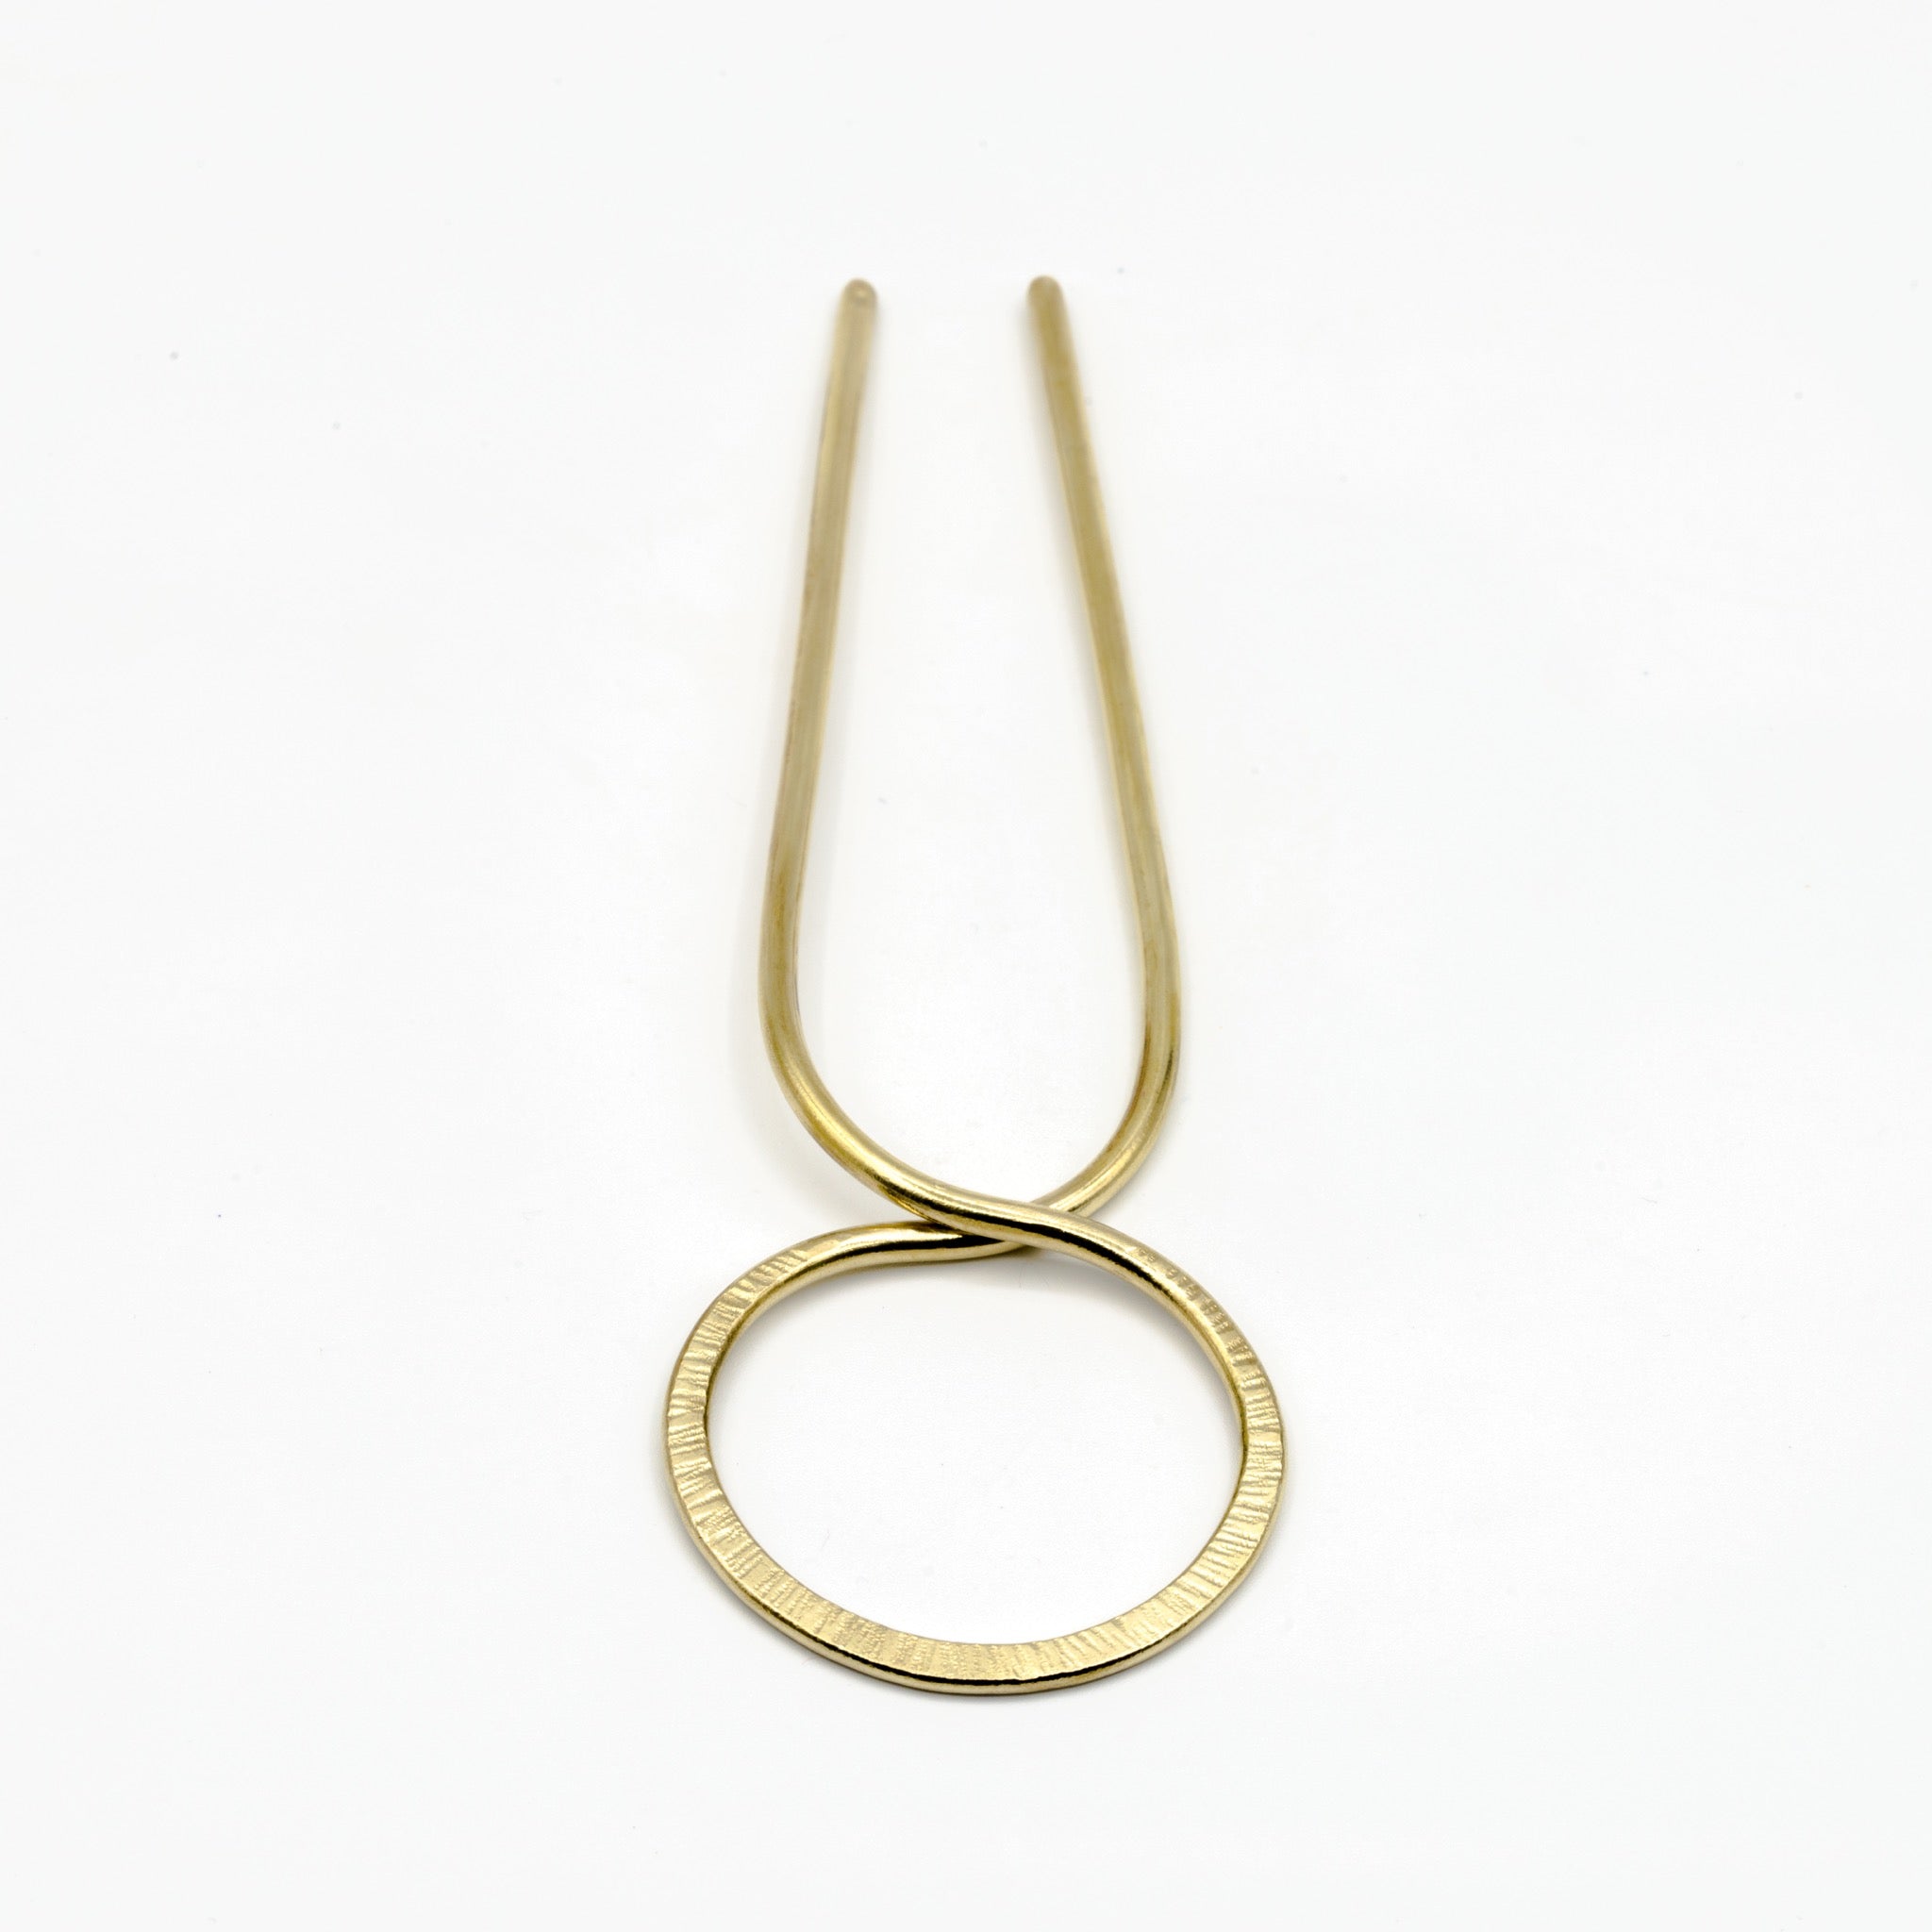 close up of brass hair pin with striped texture on white background